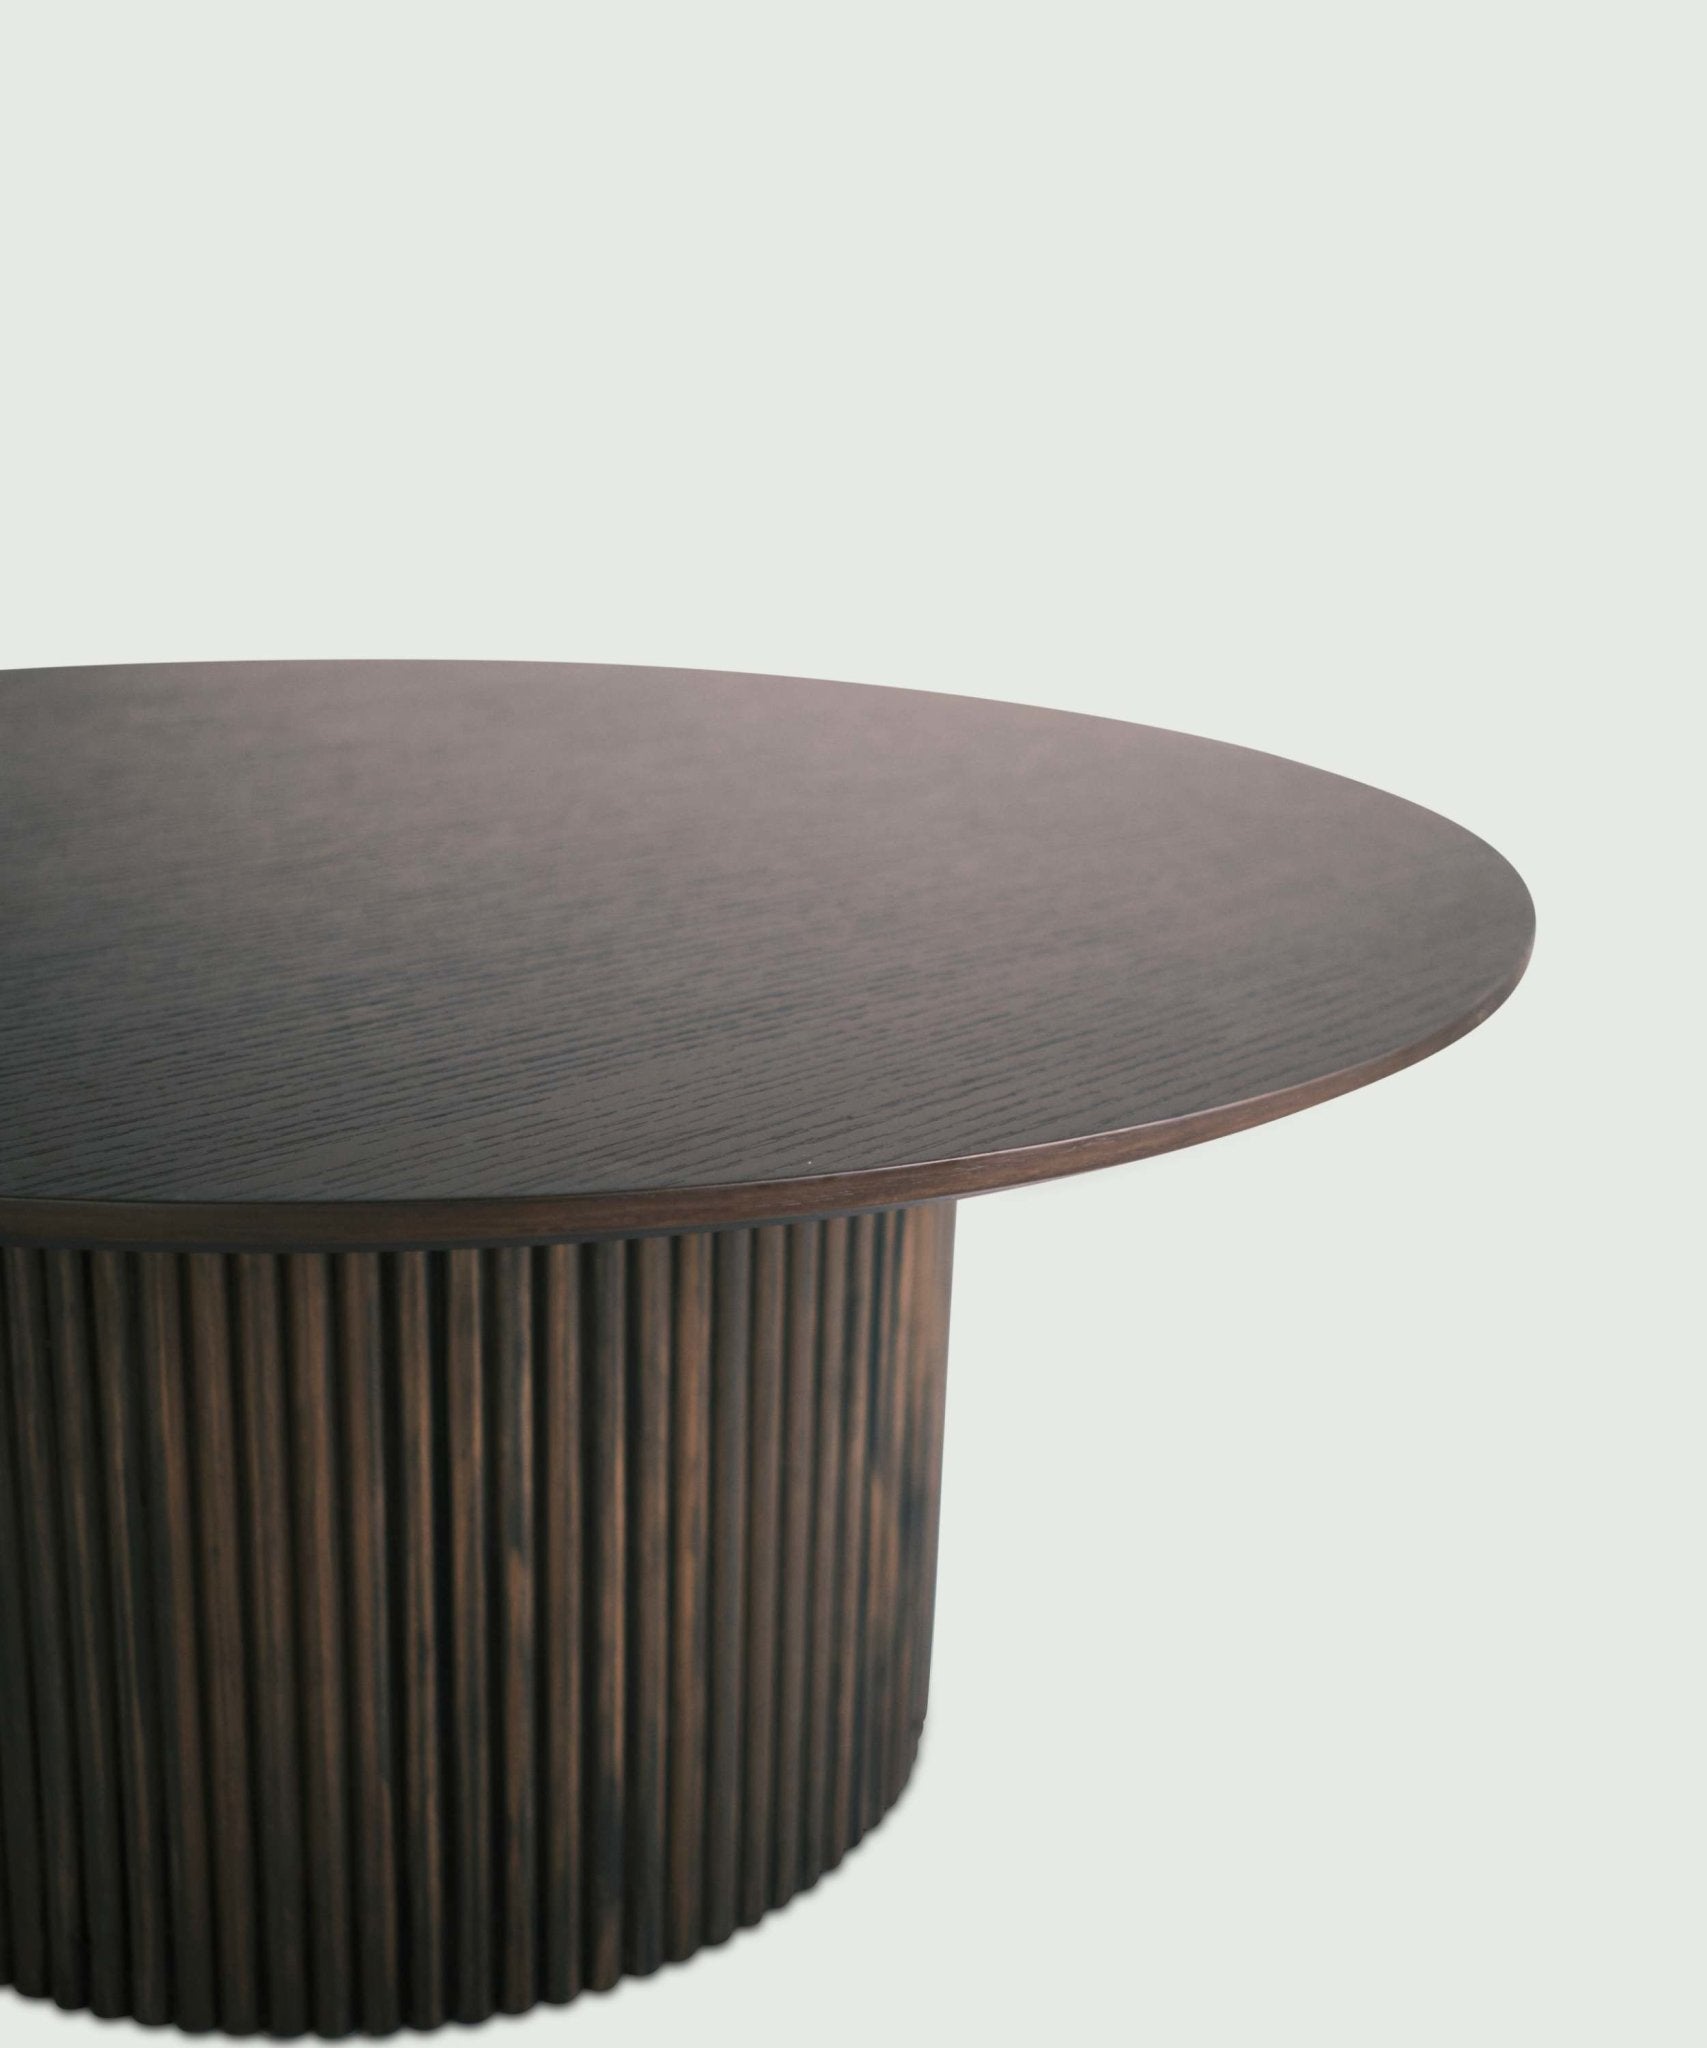 Round coffee table with rounded slats in smoked ash - Ripples